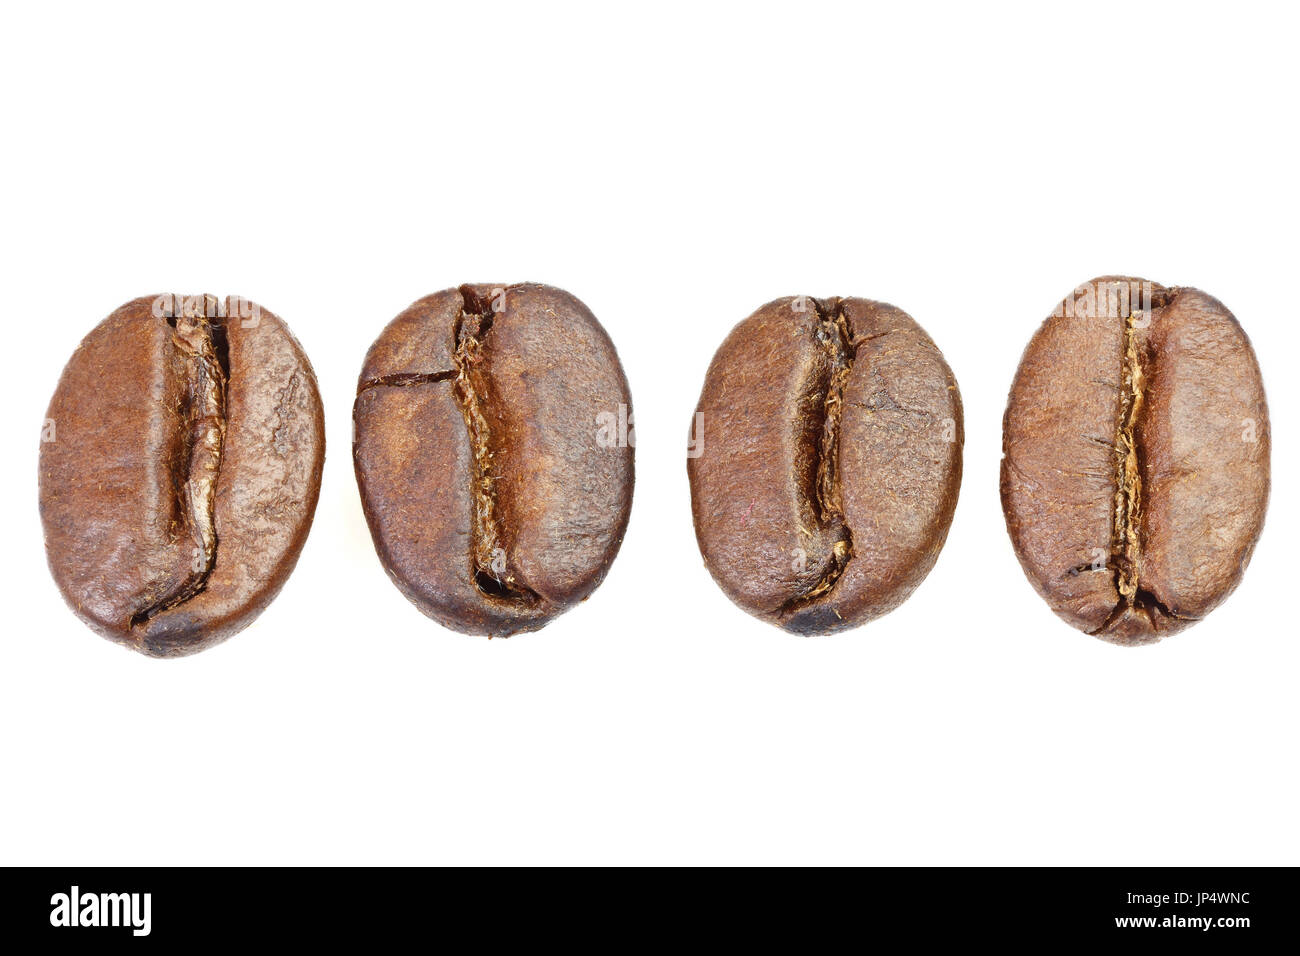 Coffee beans under microscope - extreme close up of coffee beans Stock Photo